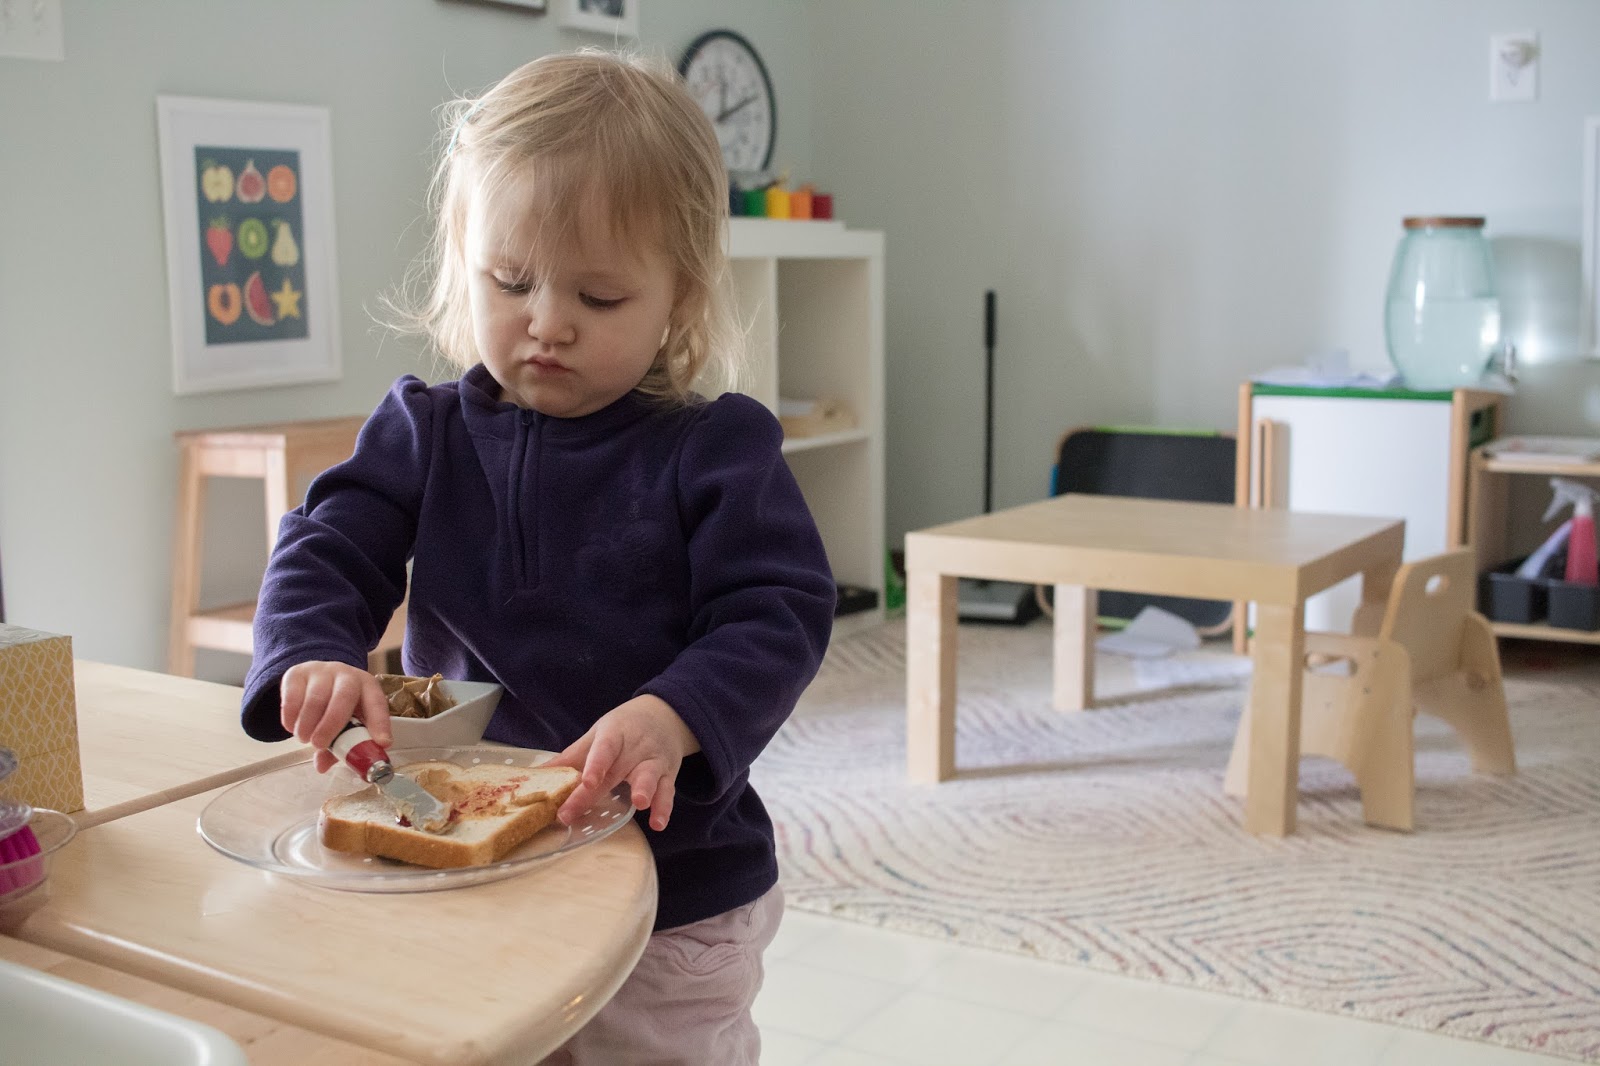 10 MONTESSORI FOOD PREPARATION ACTIVITIES FOR TODDLERS